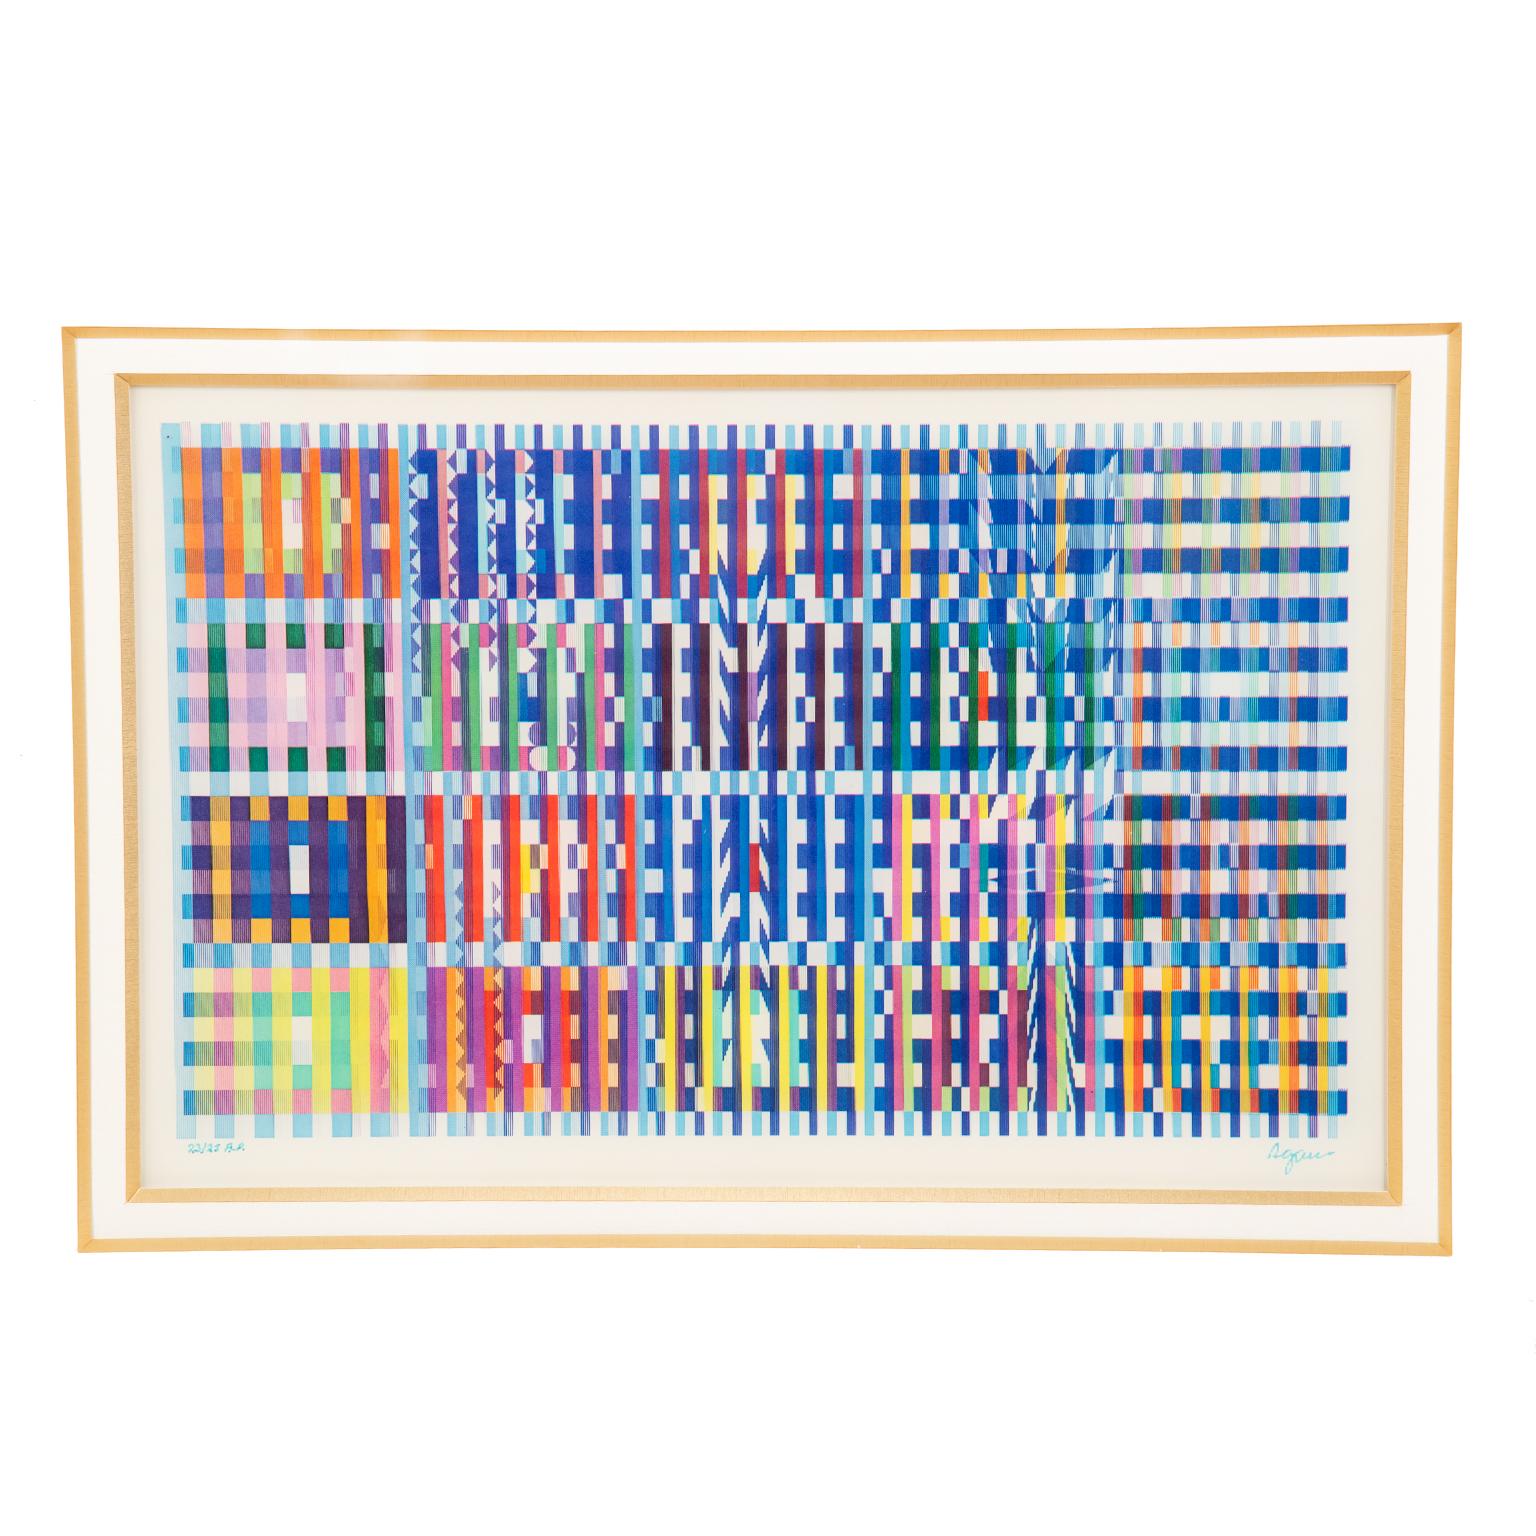 Israeli Signed and Numbered Lenticular Agamograph by Yaacov Agam